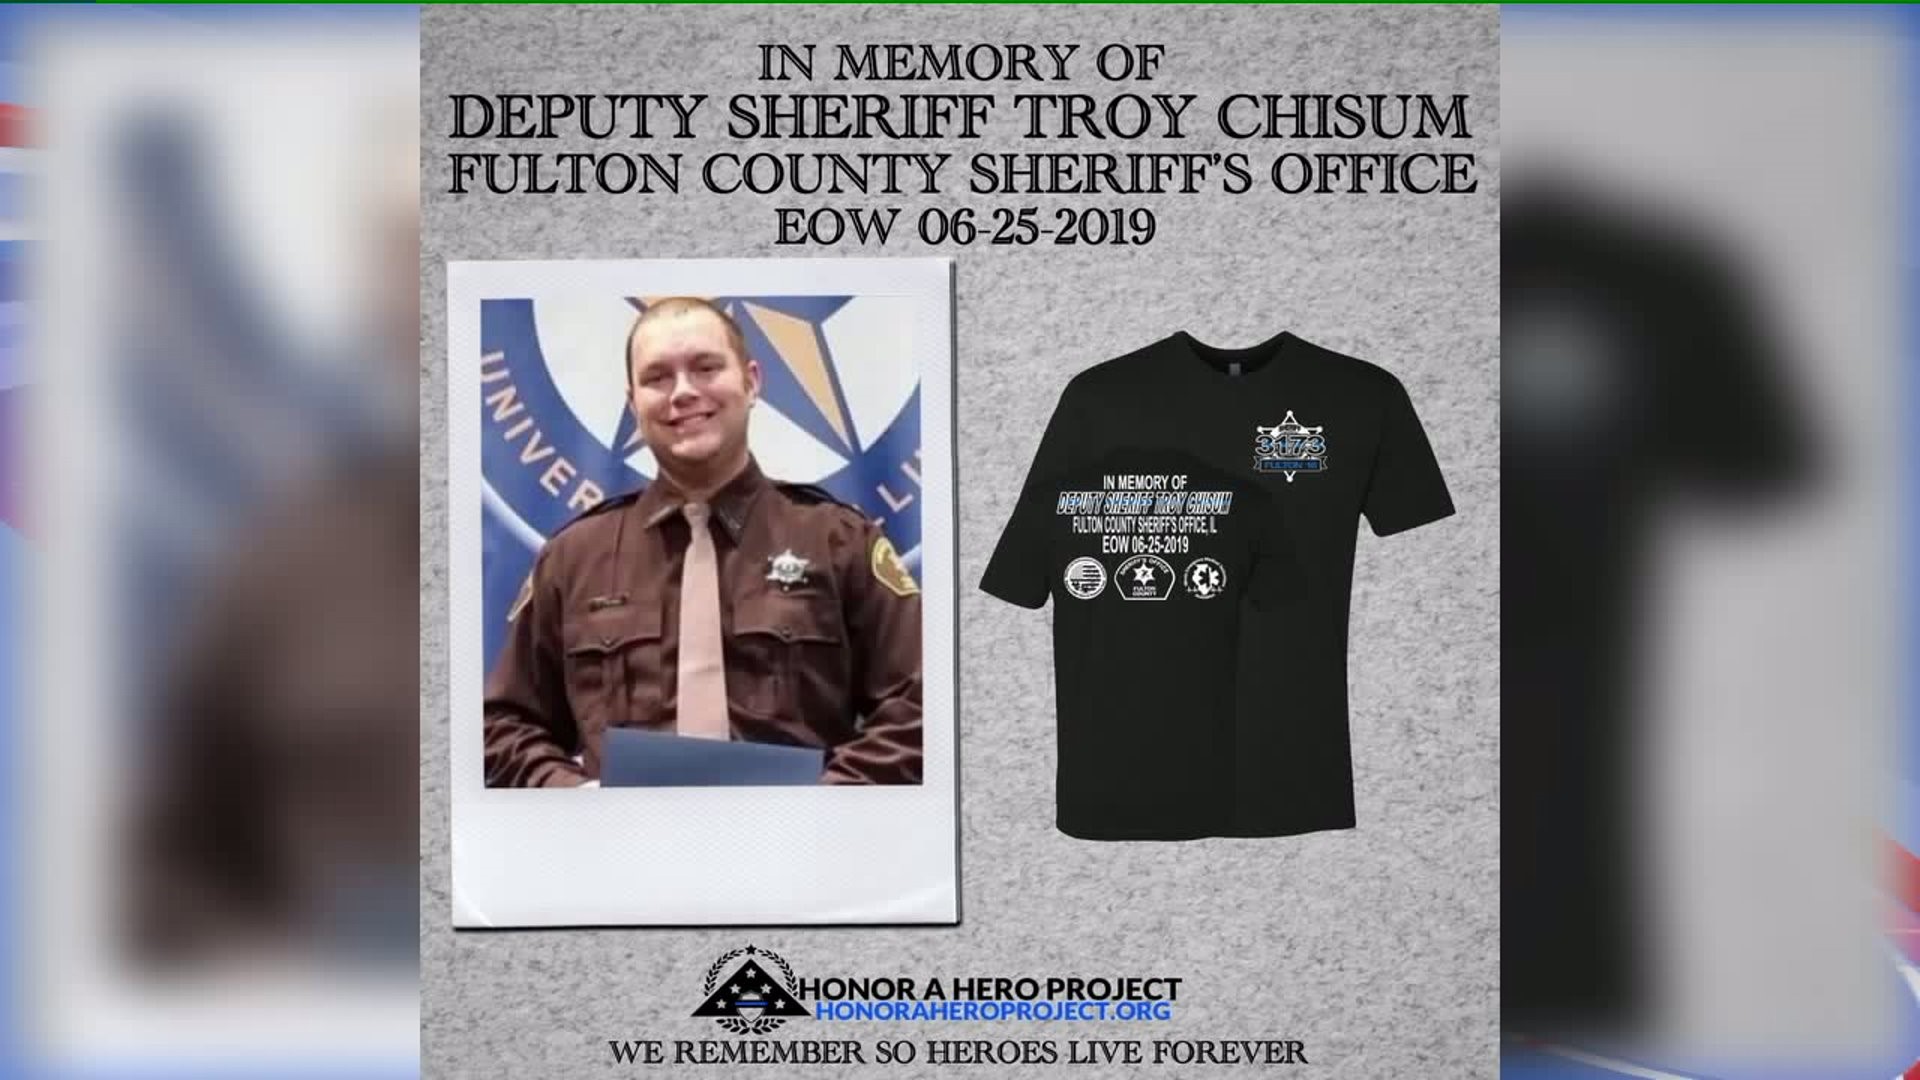 Troy Chisum funeral and t-shirt sales